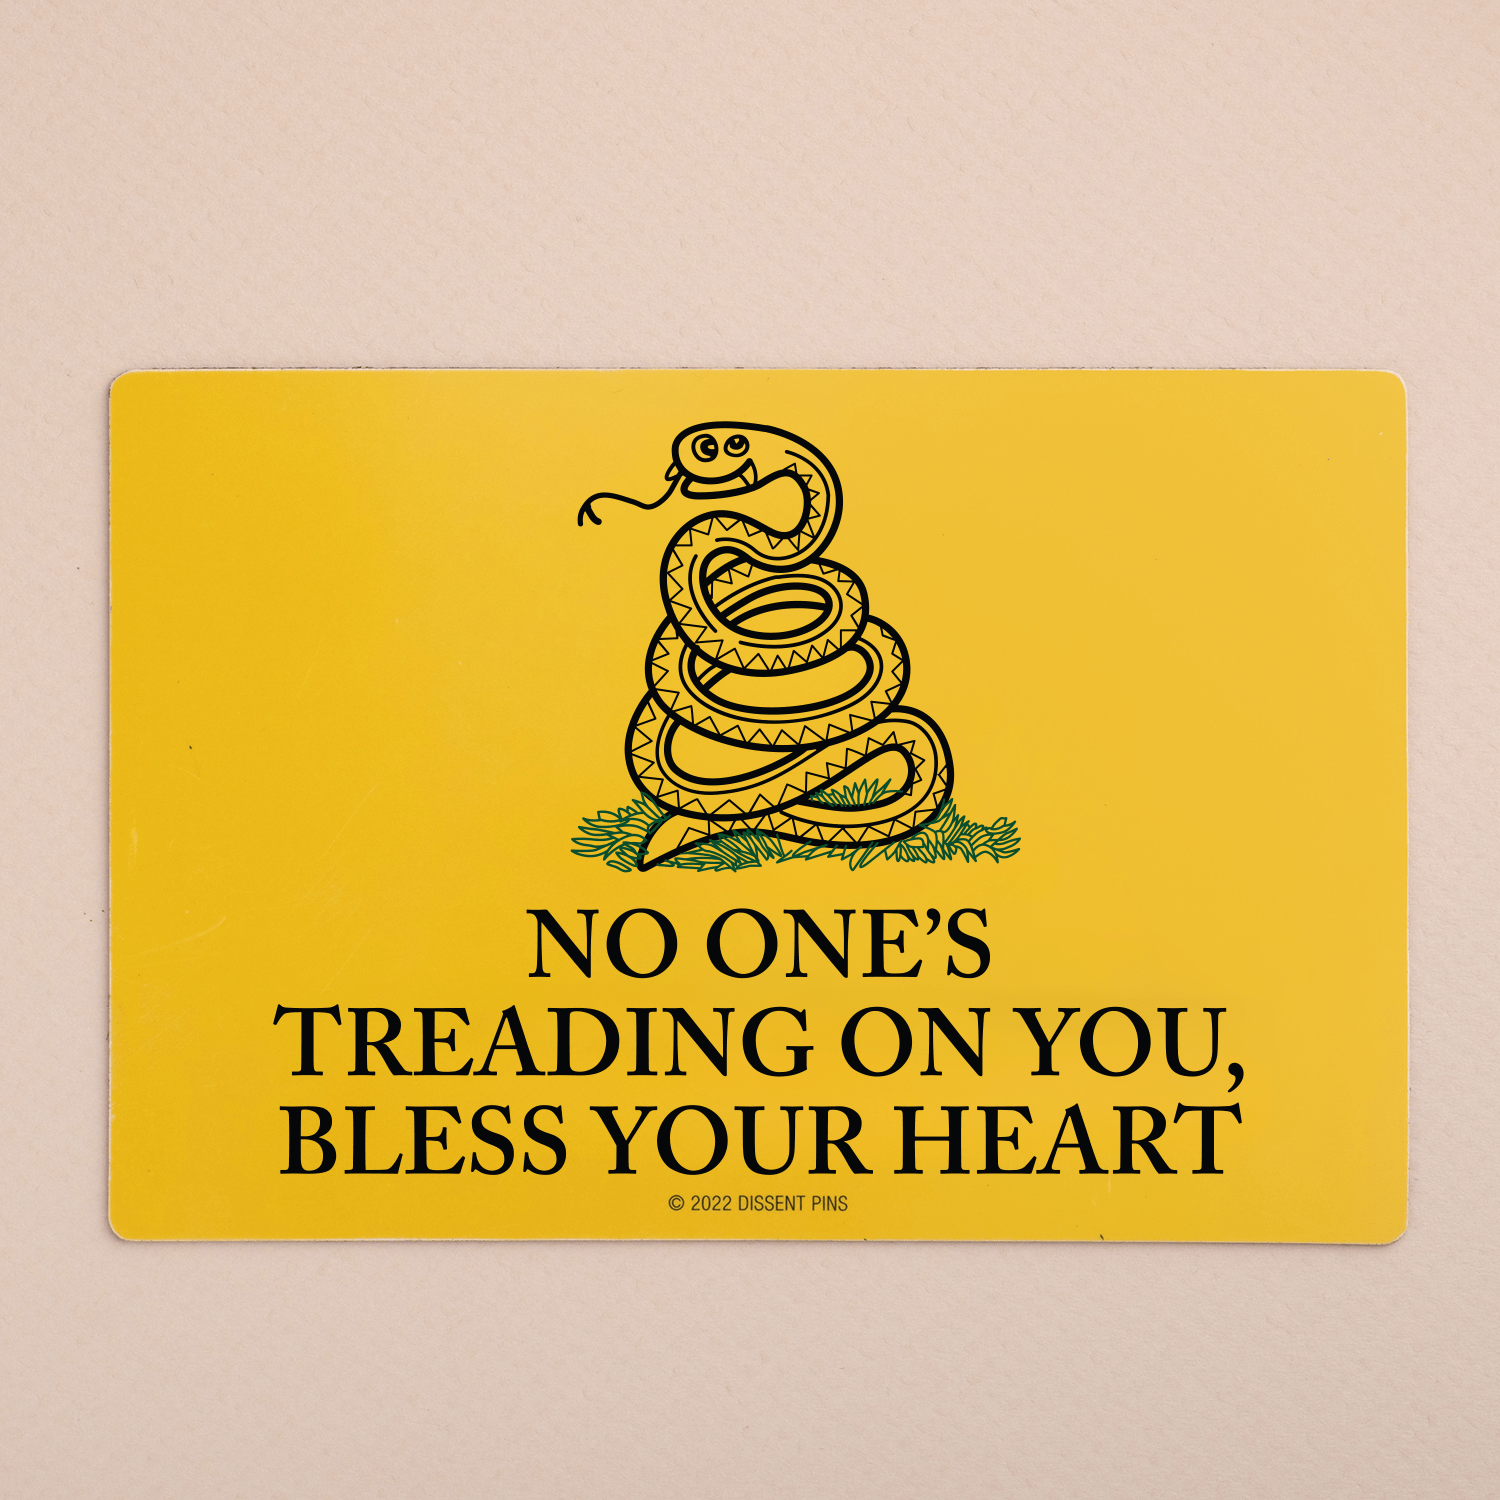 No One's Treading On You, Bless Your Heart - Car Magnet